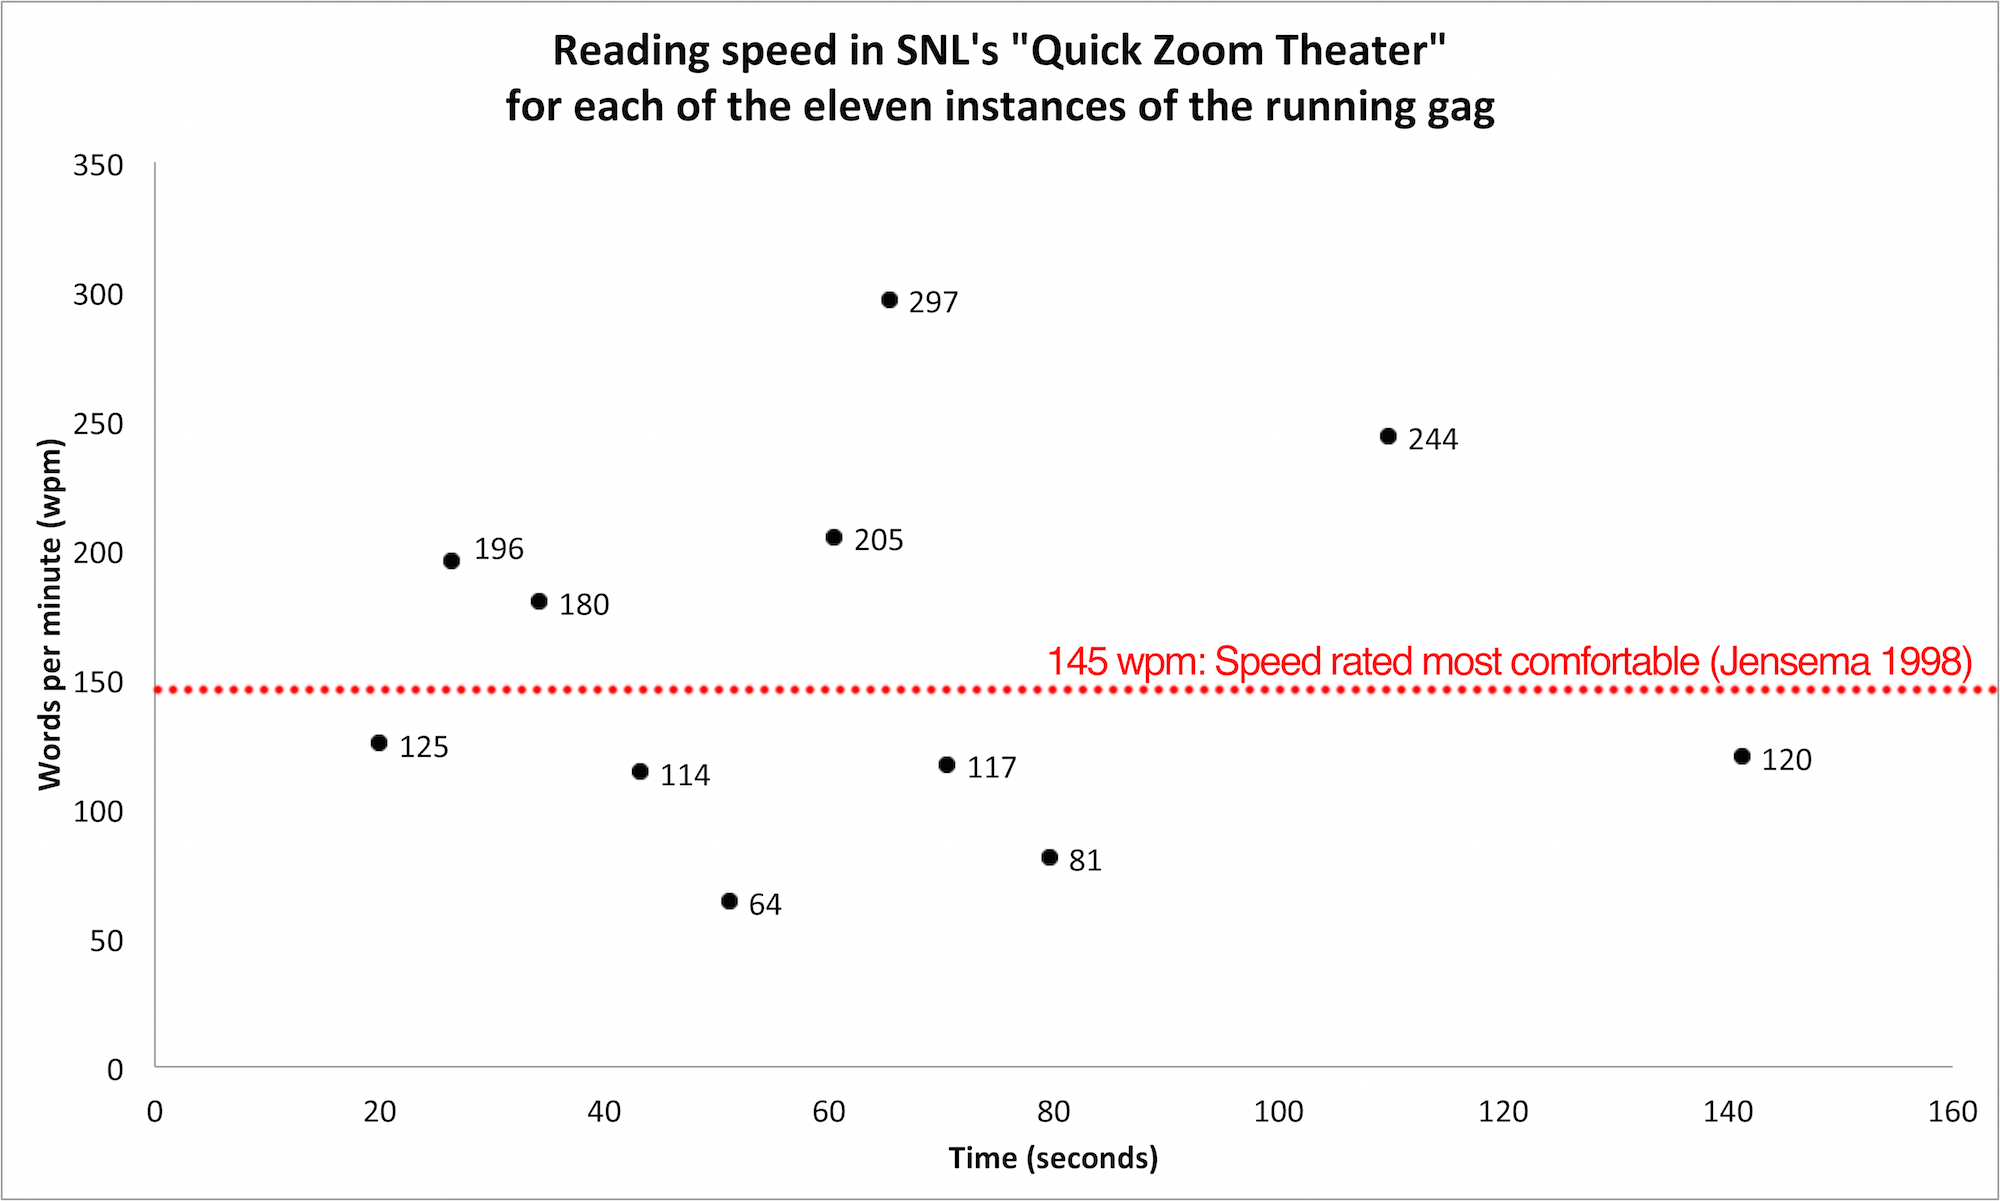 The running gag ellipses plotted on a scatter plot graph with time as the horizontal axis and reading speed as the vertical axis